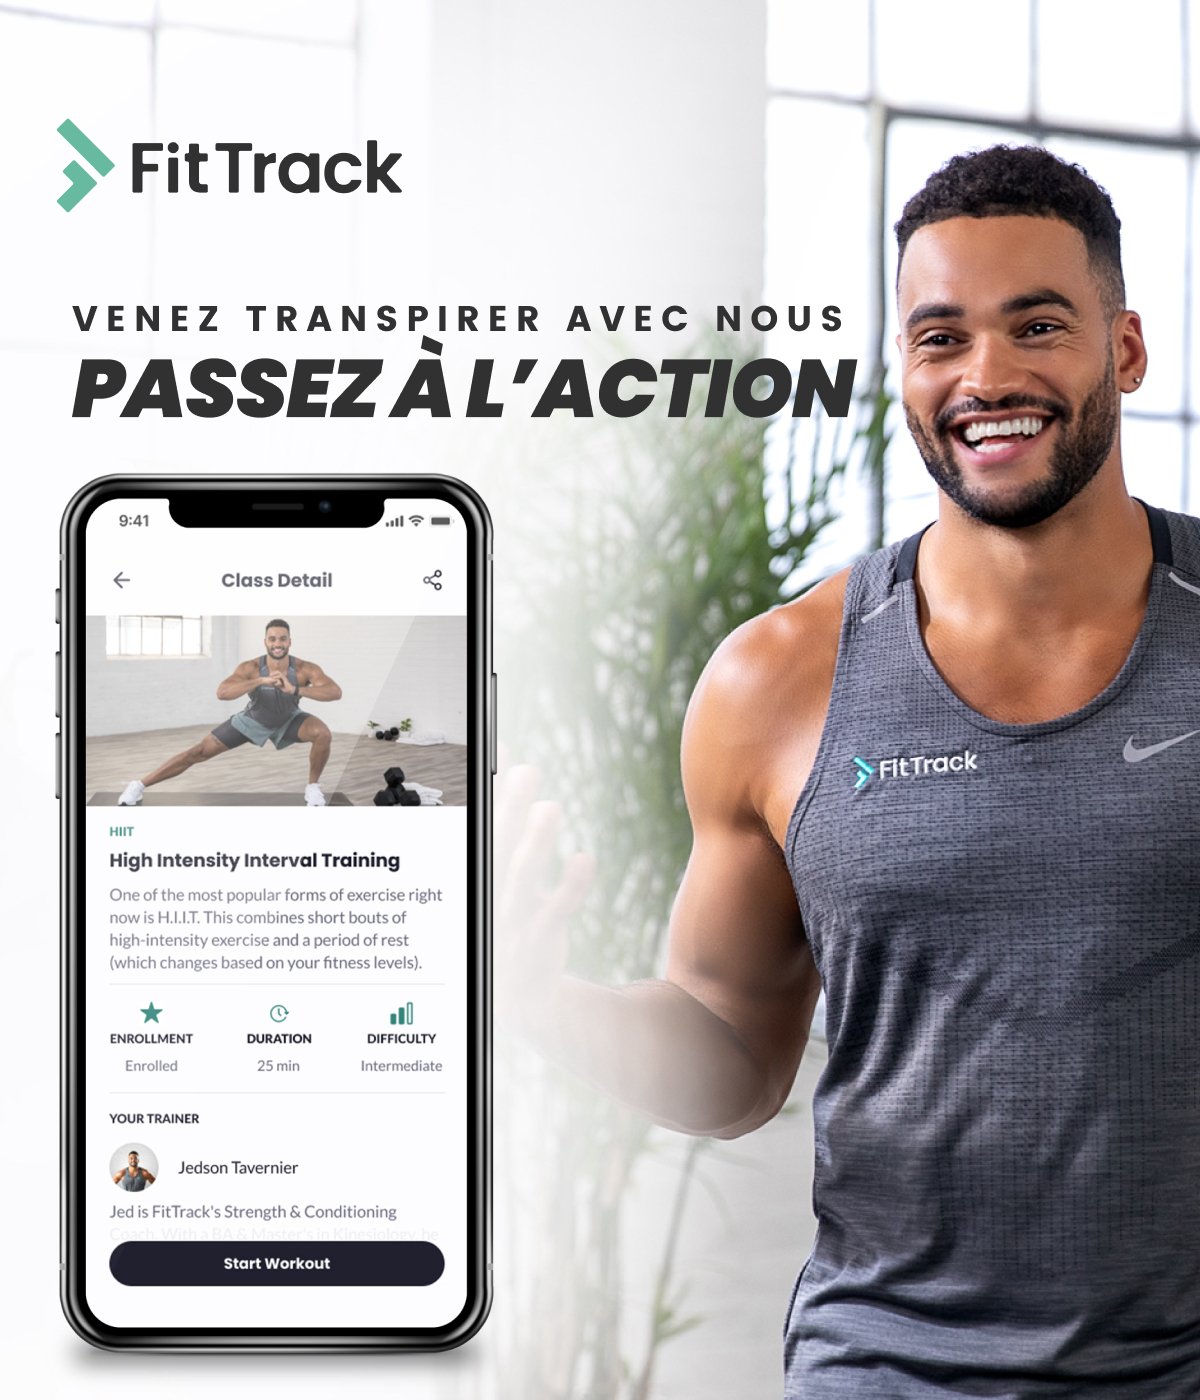 Meet the new FitTrack App